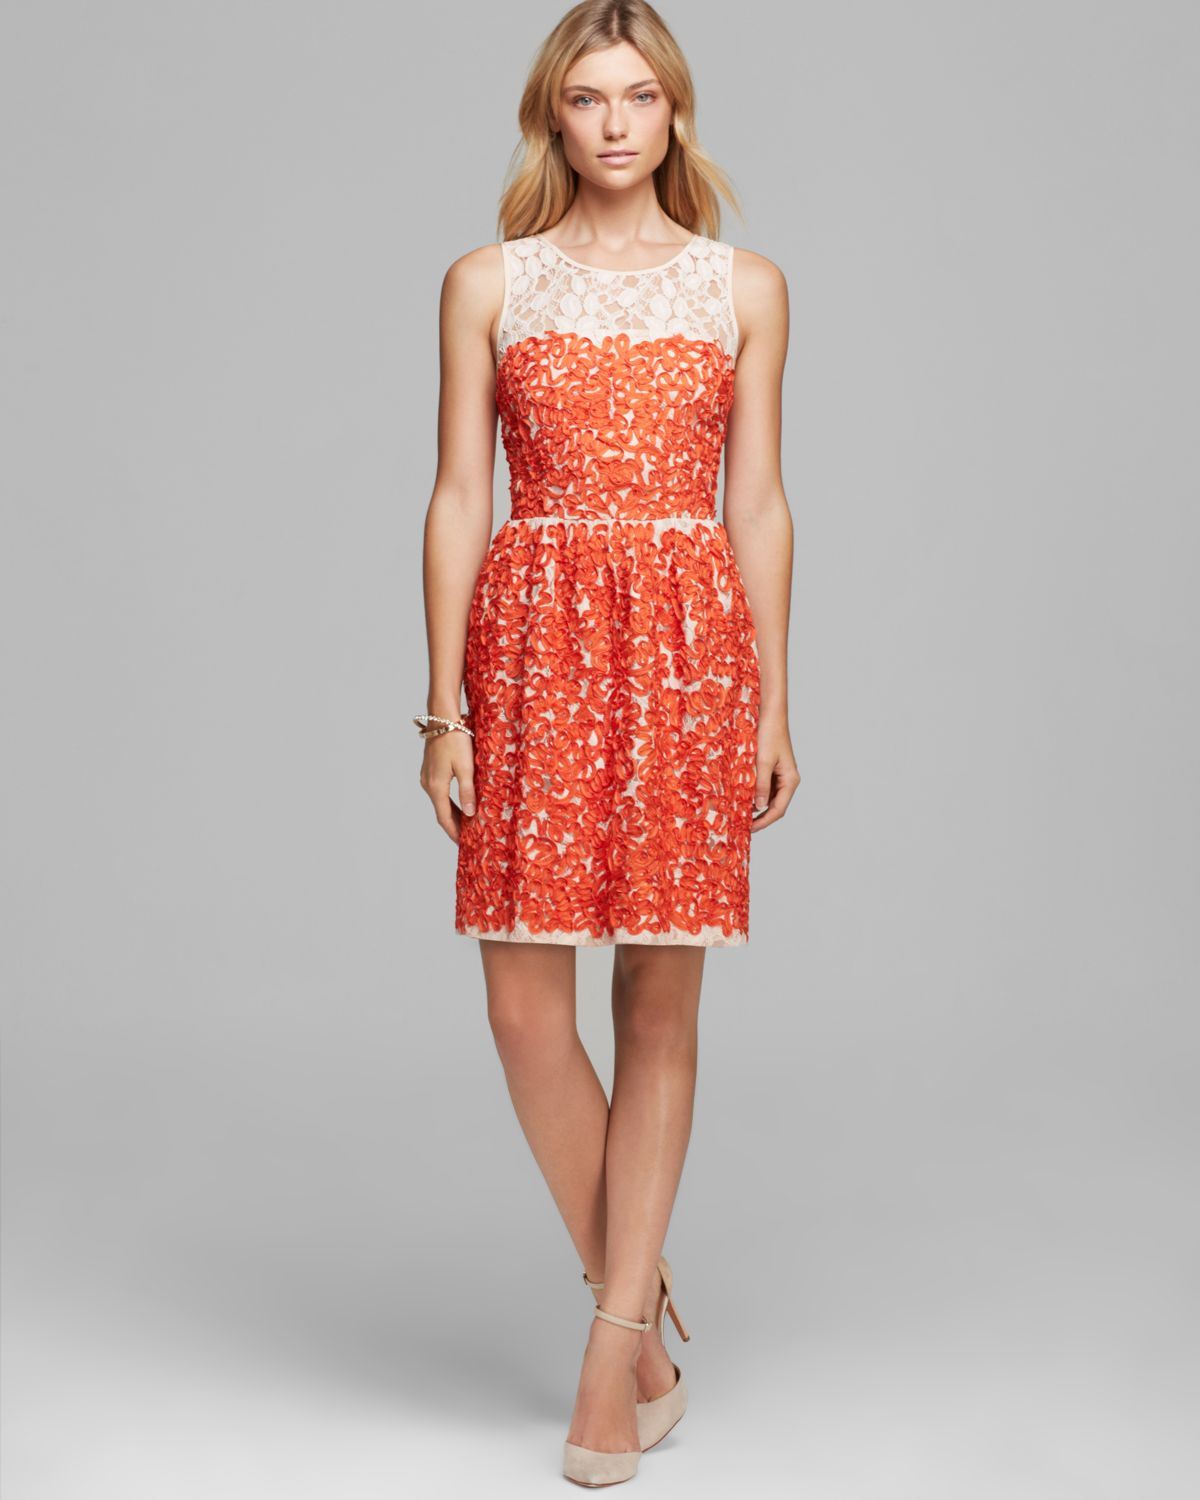 Trina Turk Dress - Parry Sleeveless Lace Sheath in Red 